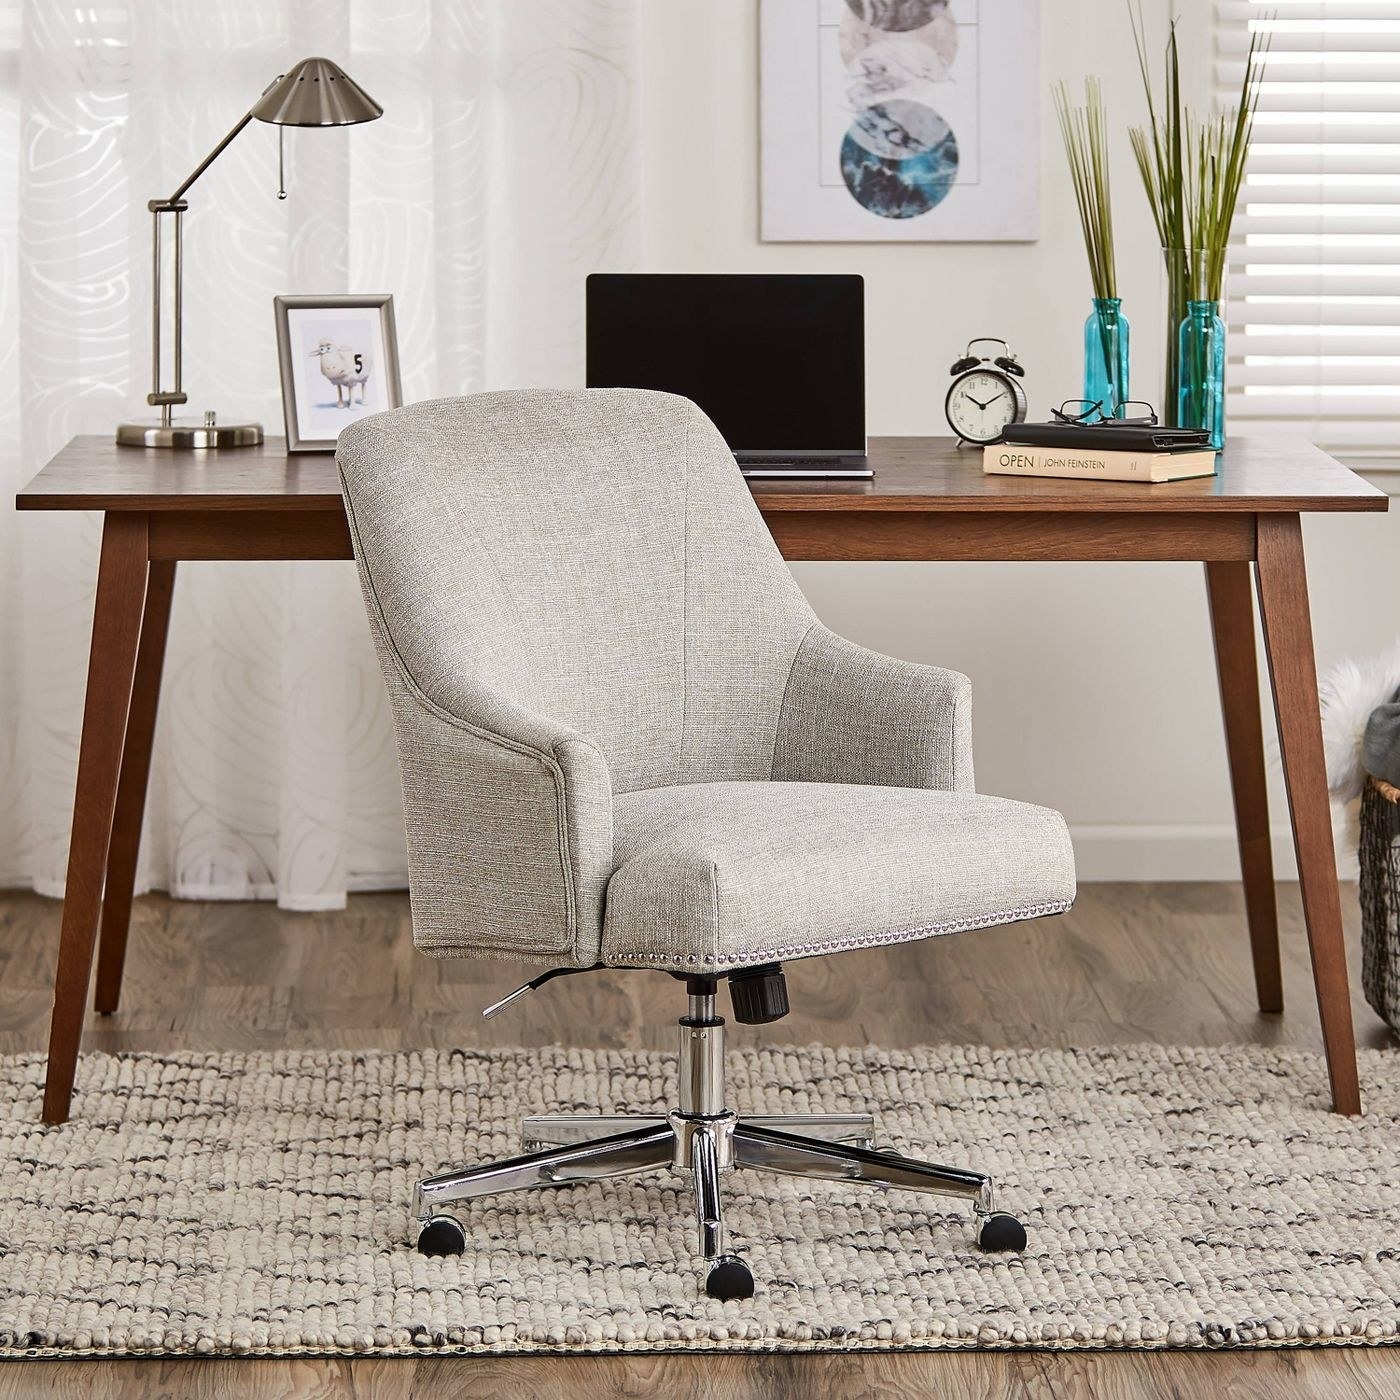 An upholstered swivel office chair in front of a desk